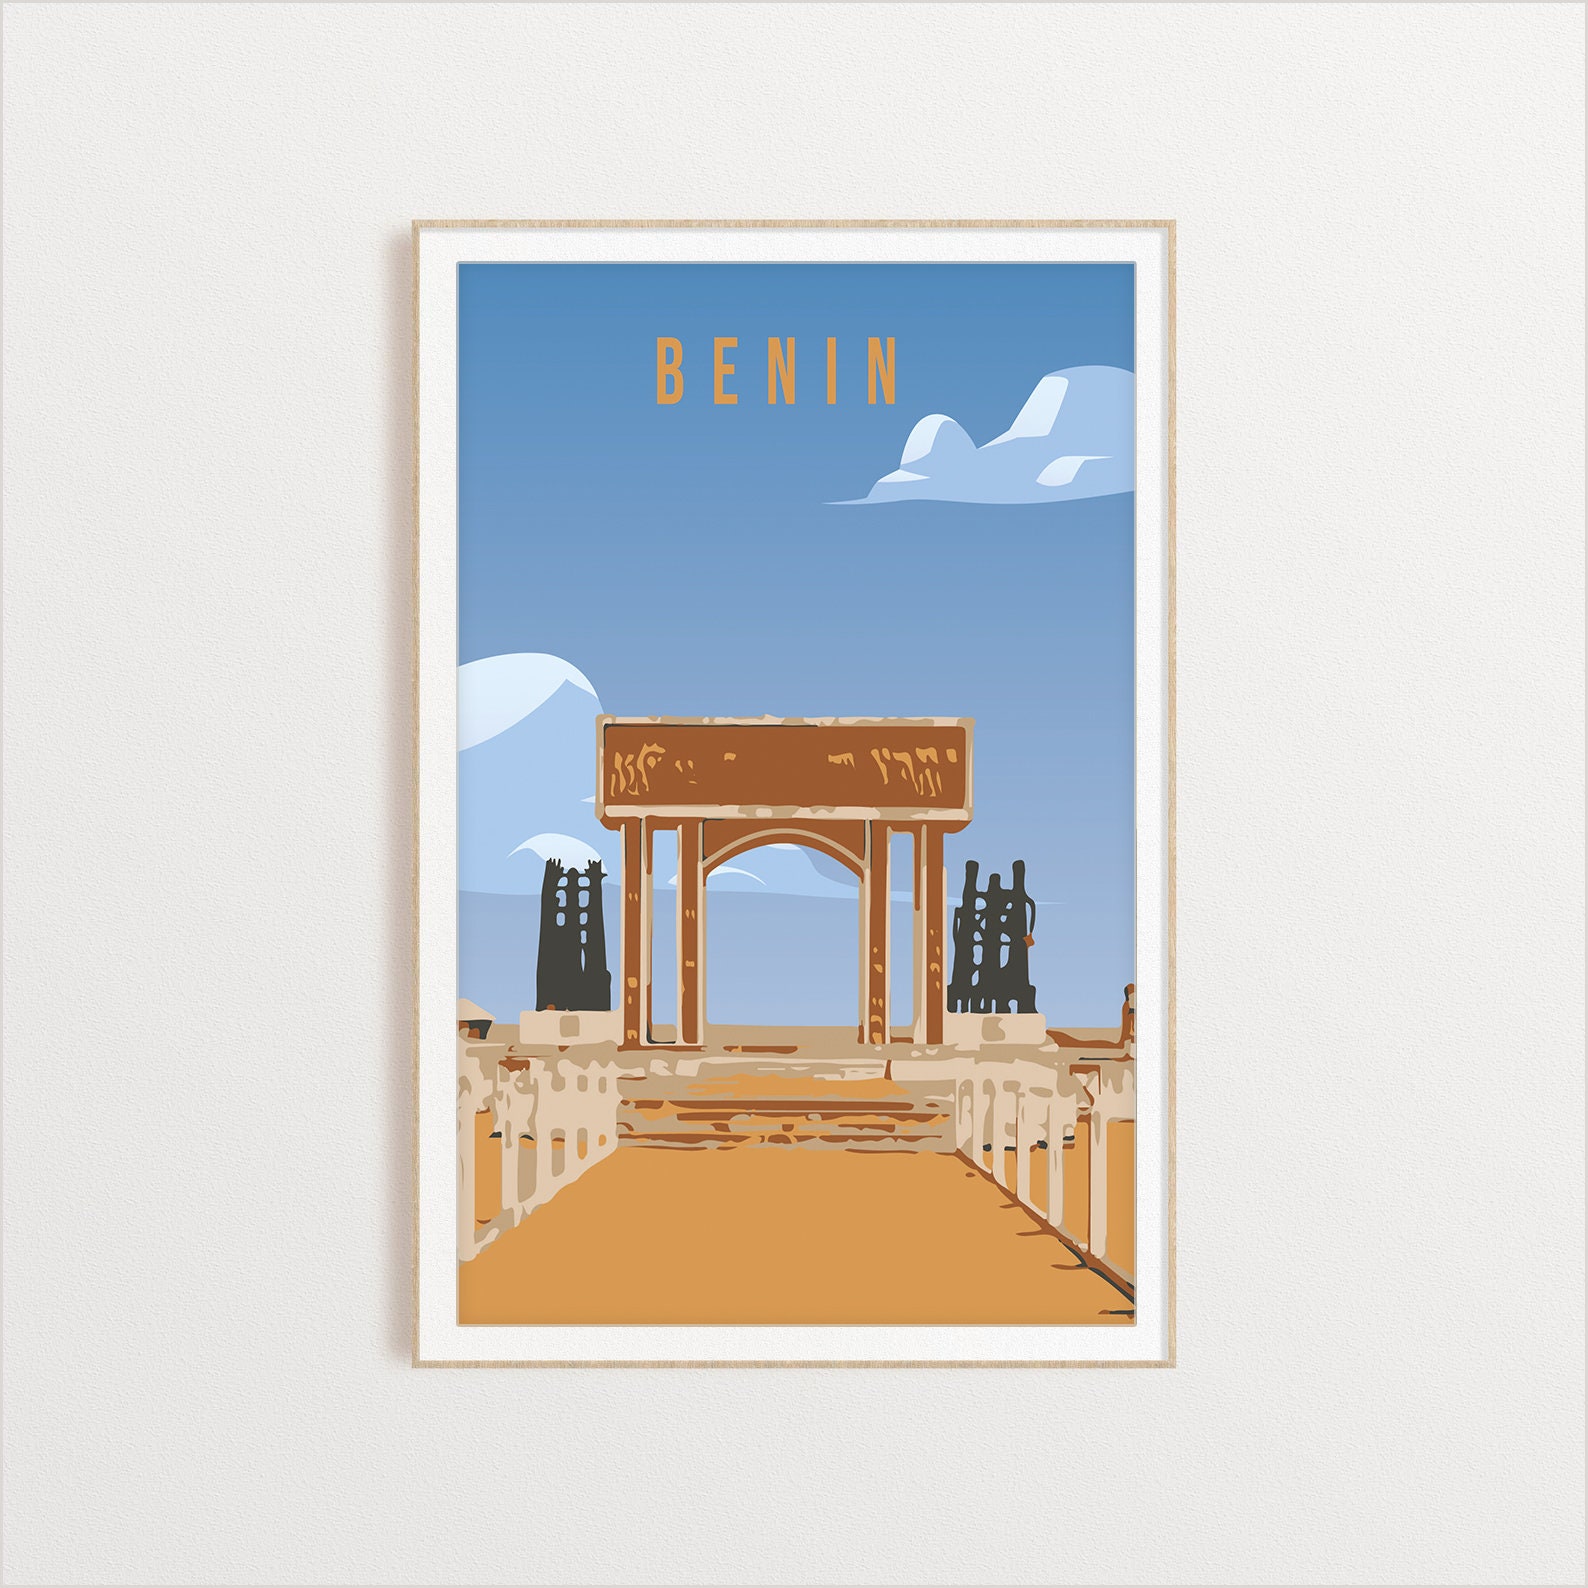 Benin Country Poster, Country Art, Country Wall Art, Country Print, Country Poster, Travel Gift,  Benin Travel Illustration